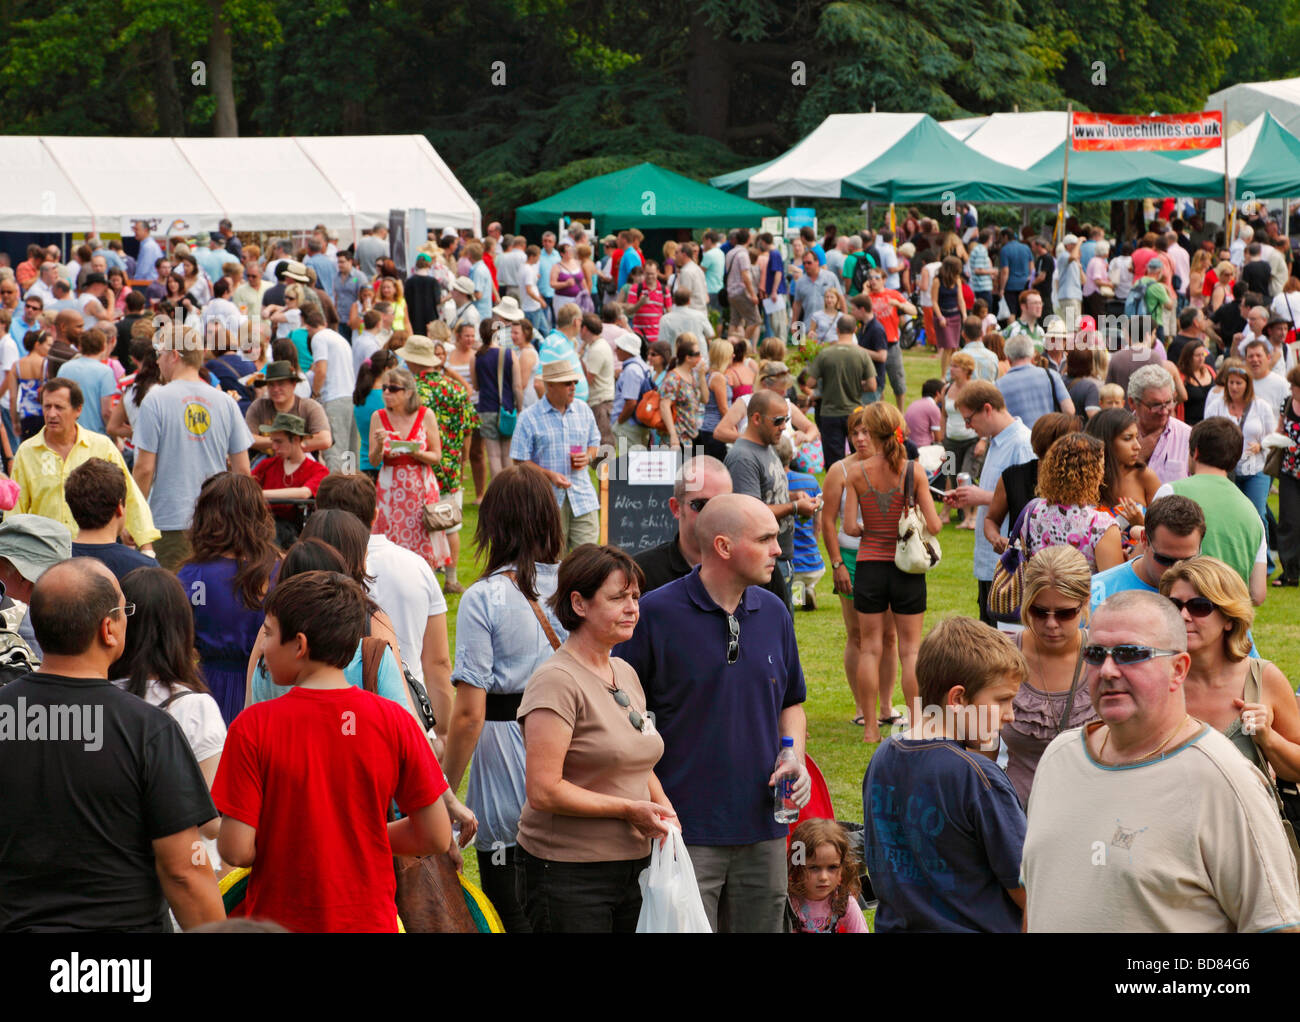 Crowds attending the West Dean Chilli Fiesta. West Sussex, England, UK. Stock Photo